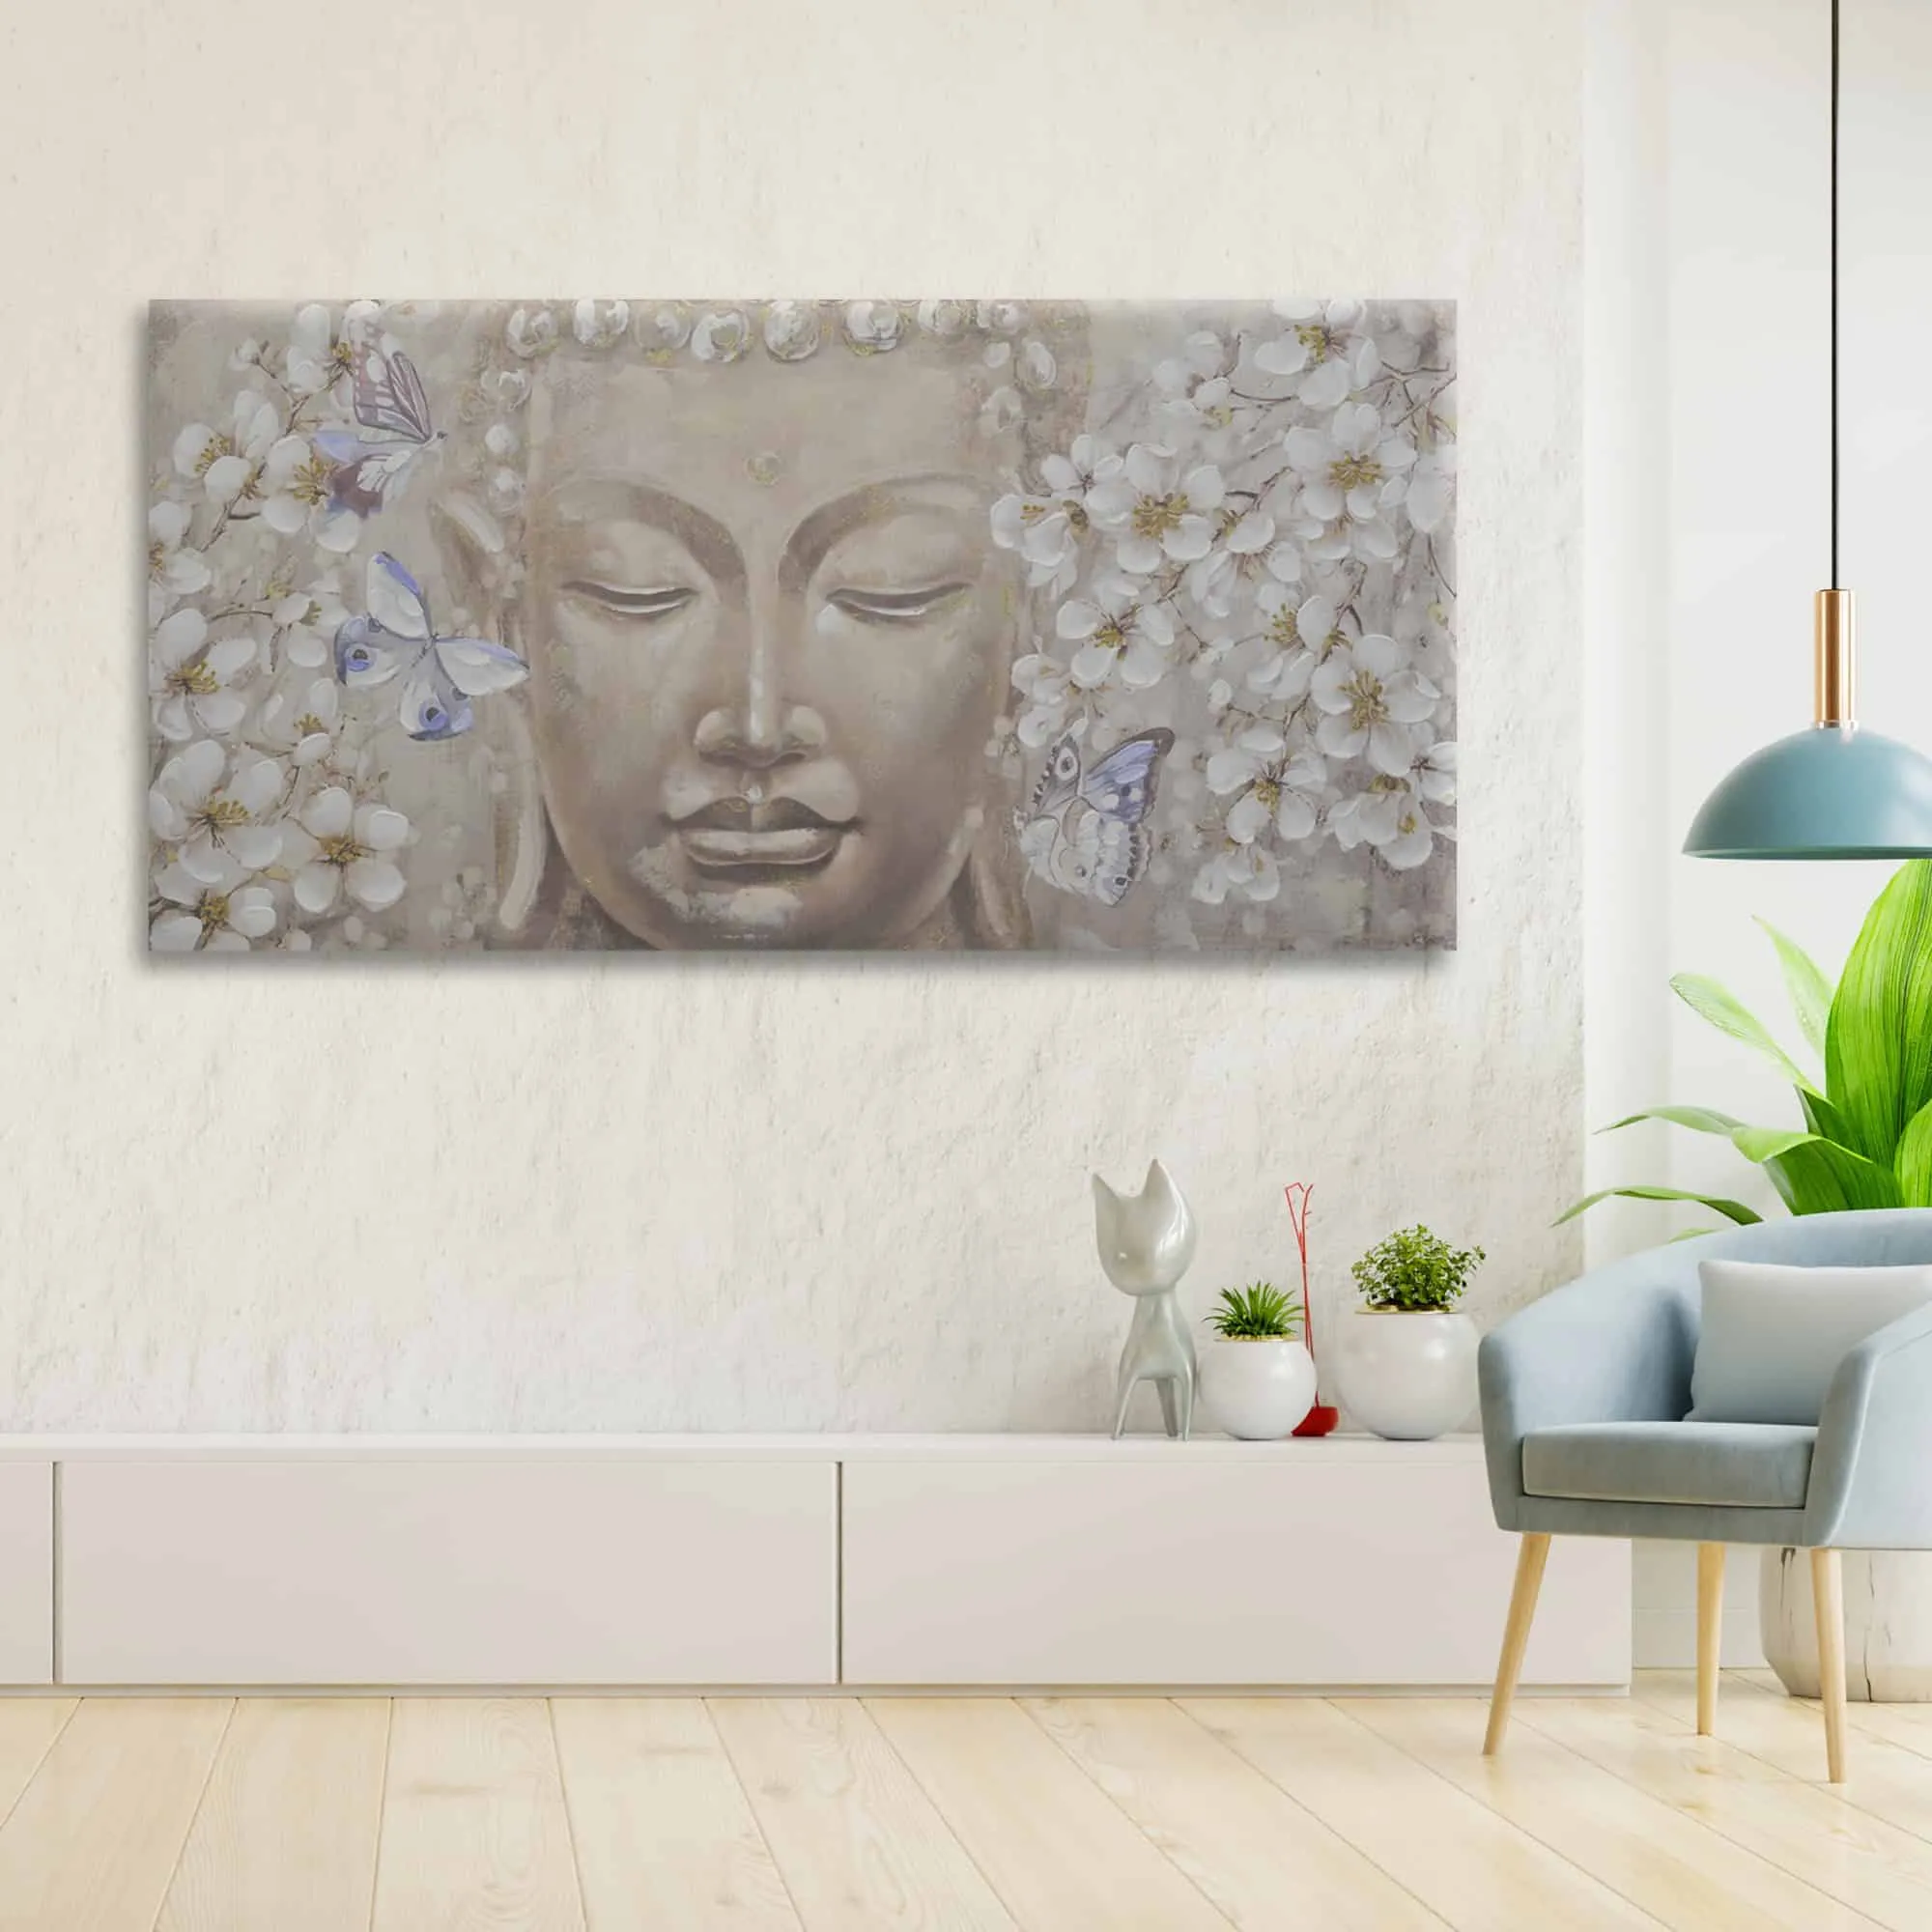 A nice painting of Buddha, displayed on a white wall.